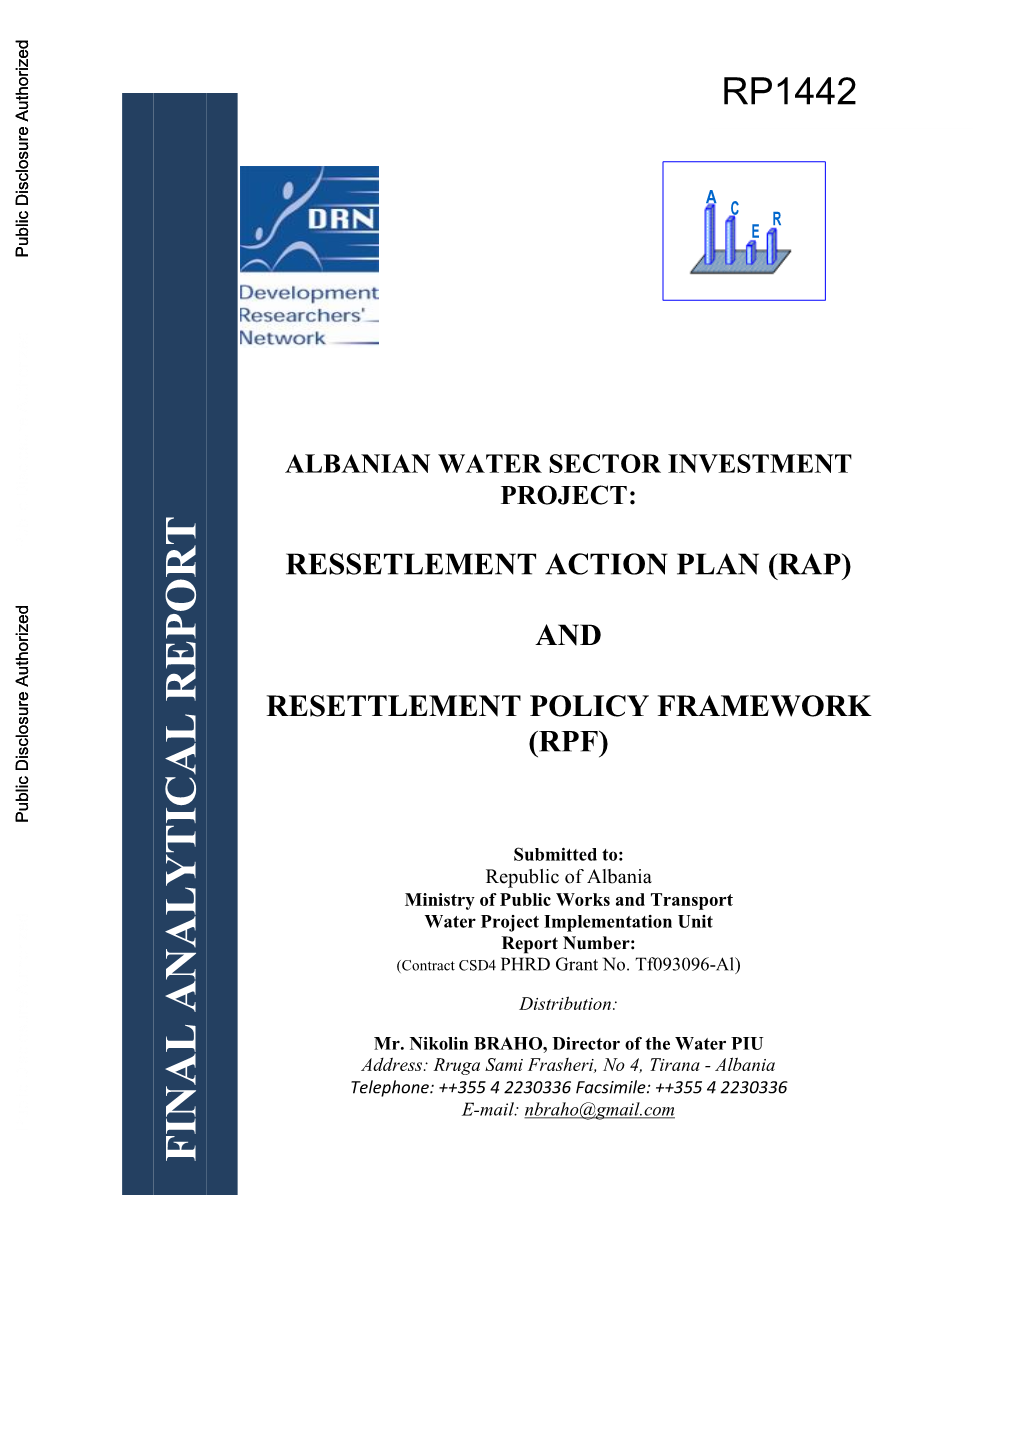 Annex 3. Resettlement Policy Framework for Water Sector Investment Project